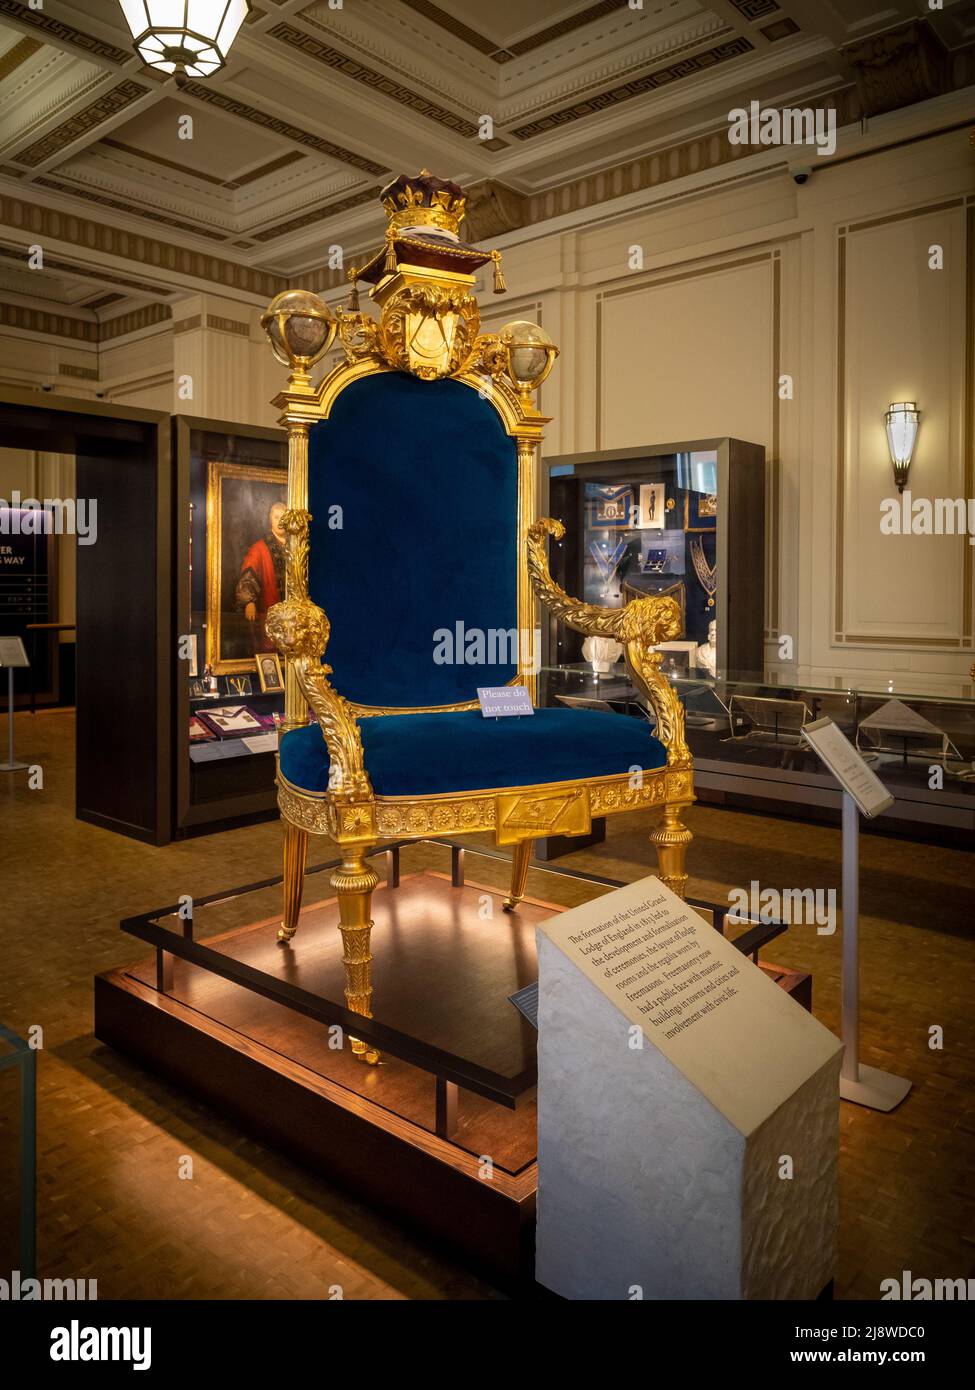 Grand Master's Throne, an exhibit in the Museum of Freemasonry, located in the Freemasons' Hall, London. Stock Photo